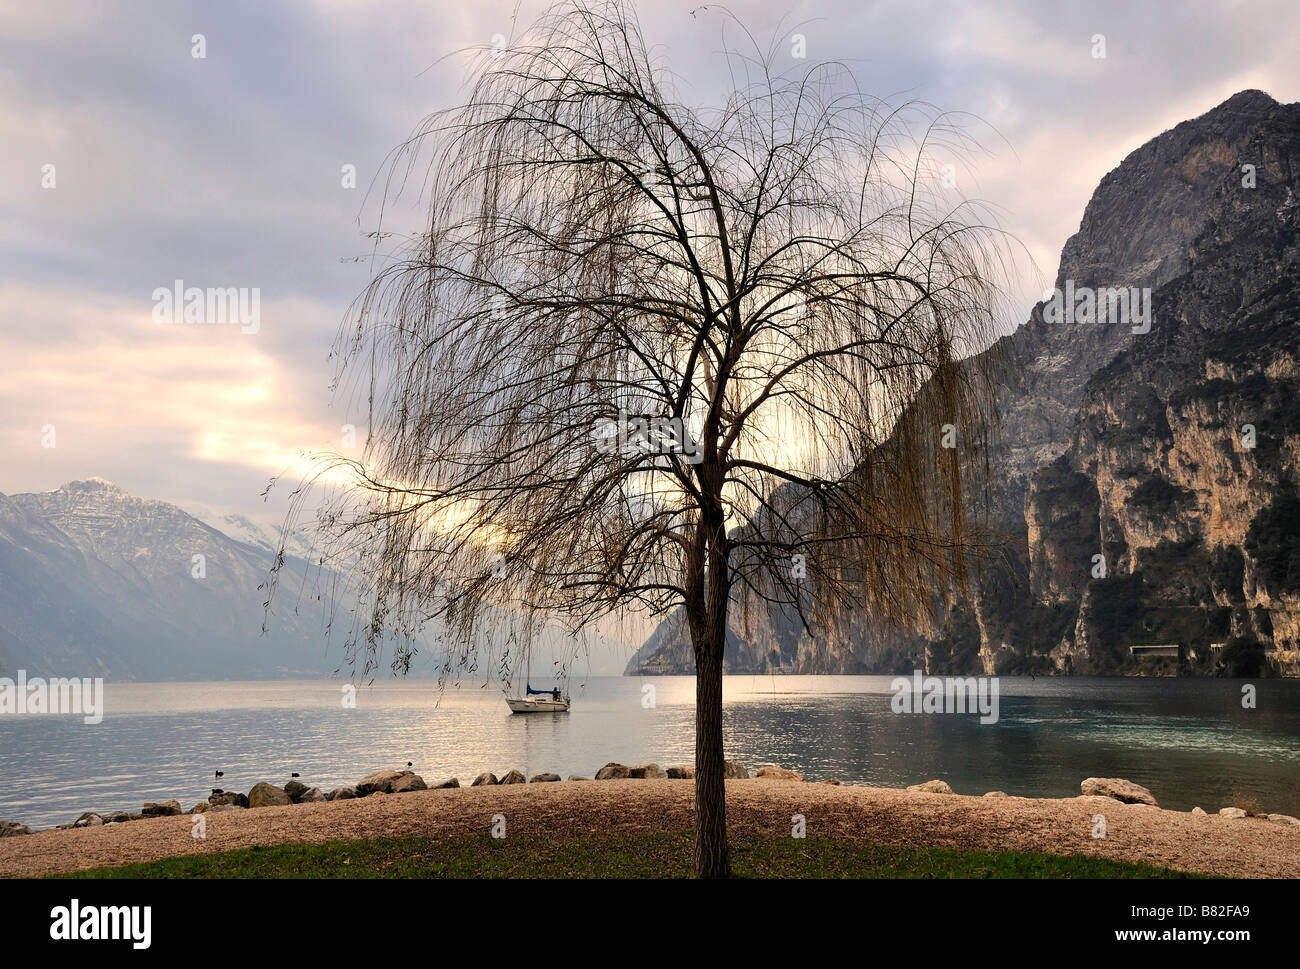 tree growing by lakeshore in Northern Italy Stock Photo